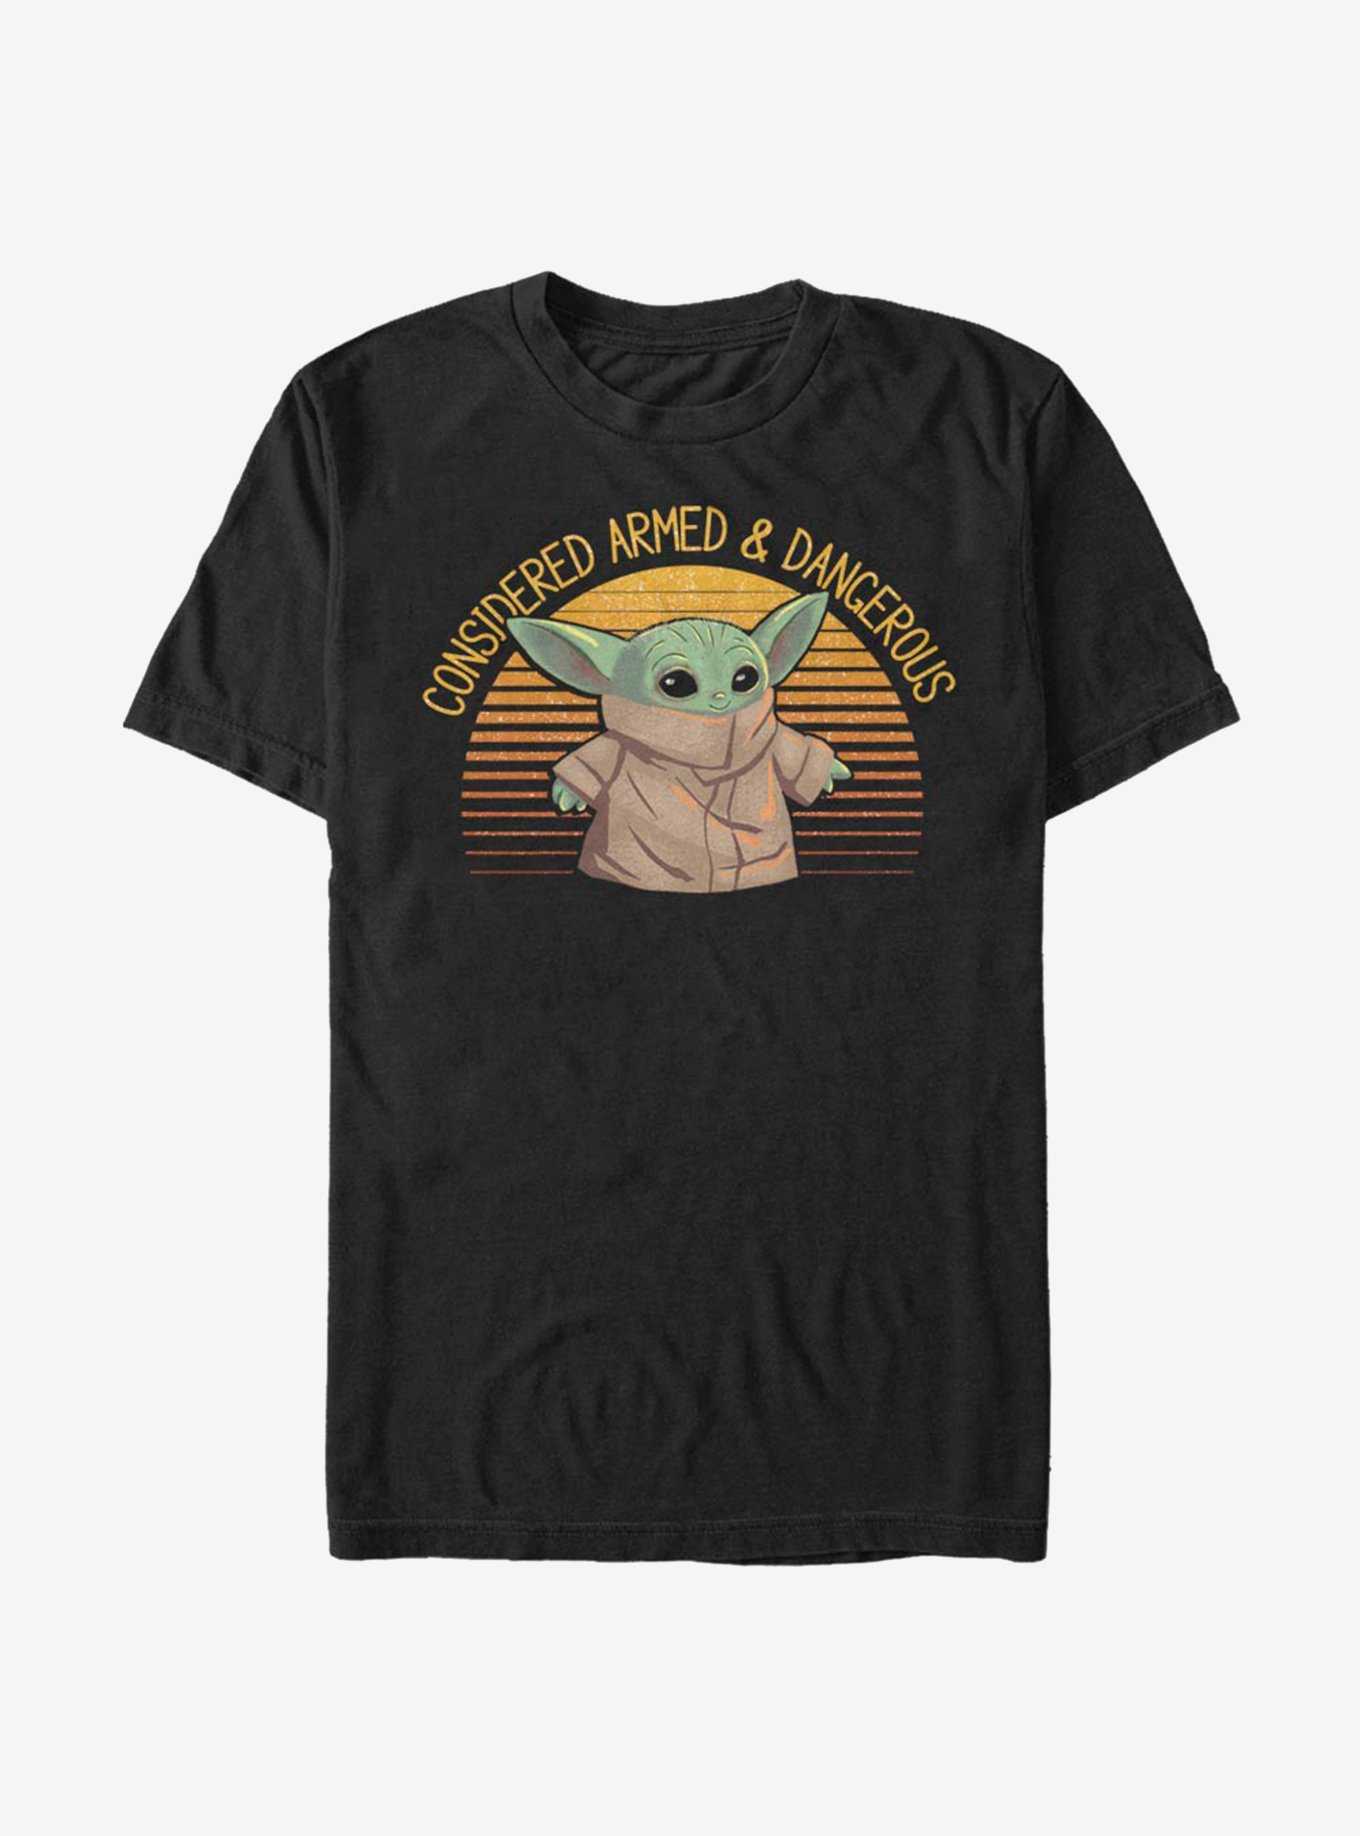 Star Wars The Mandalorian The Child Considered Armed & Dangerous T-Shirt, , hi-res